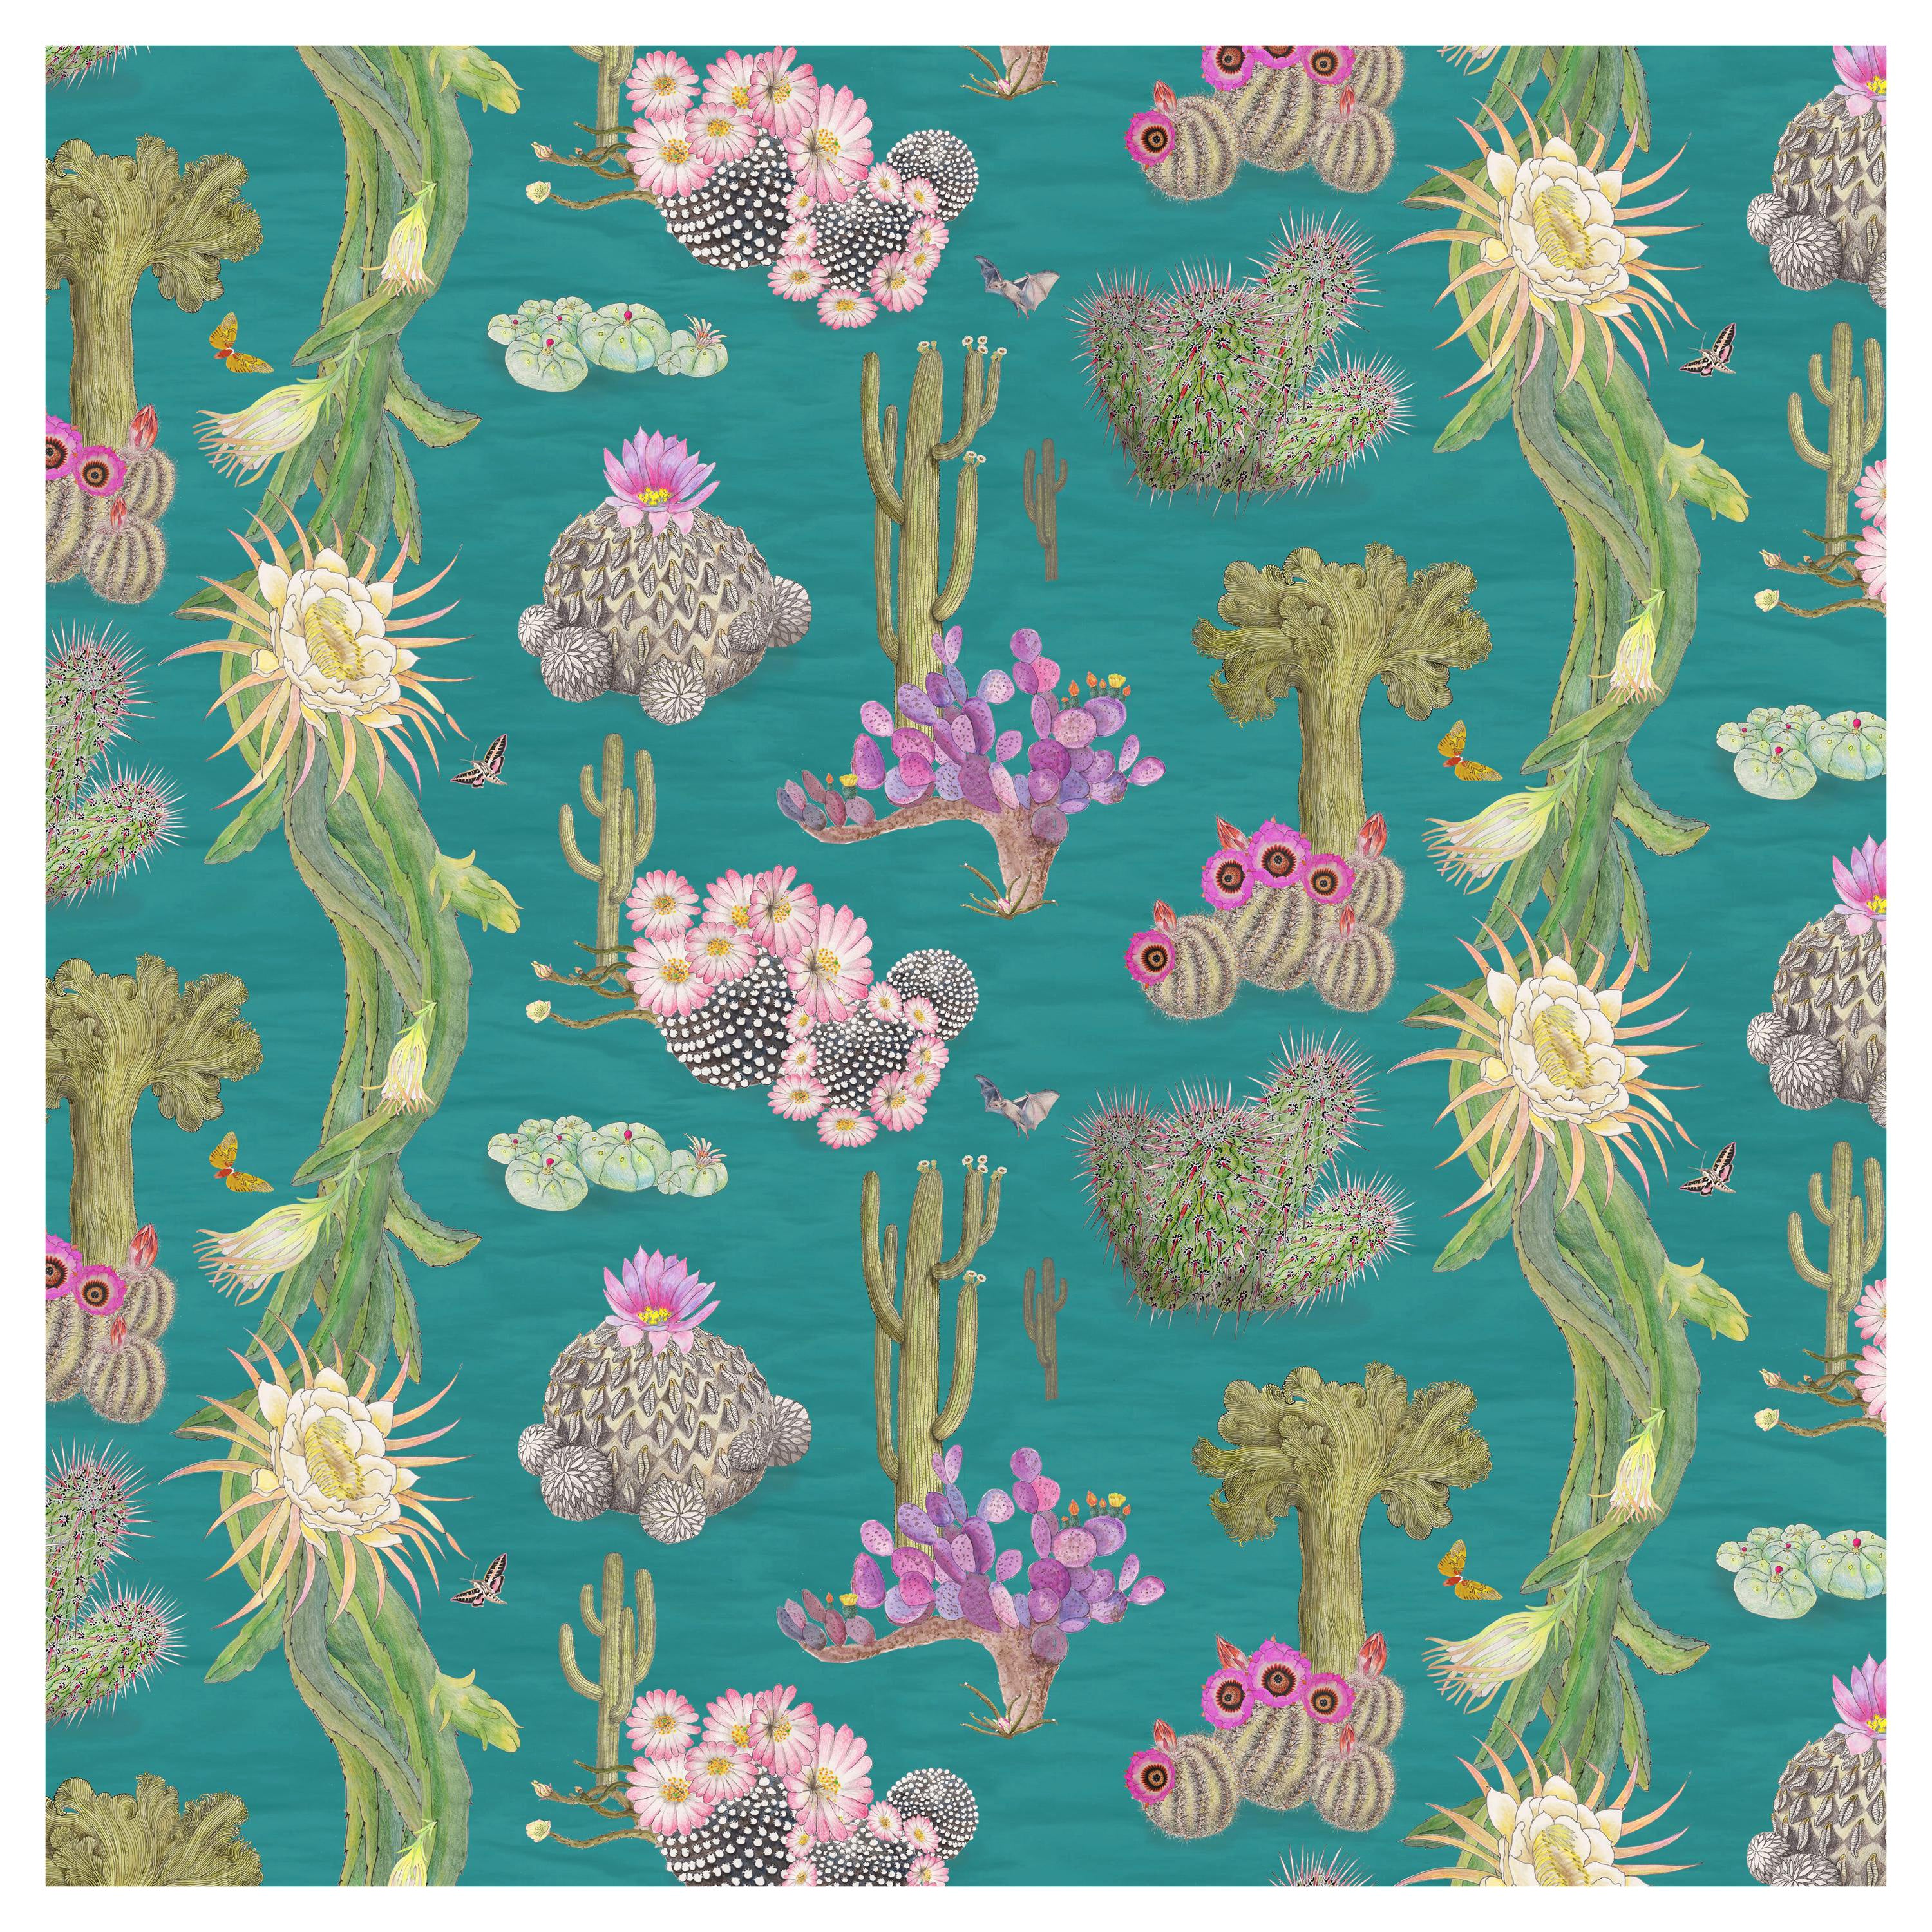 Cactus Mexicanos in Turquoise Botanical Wallpaper